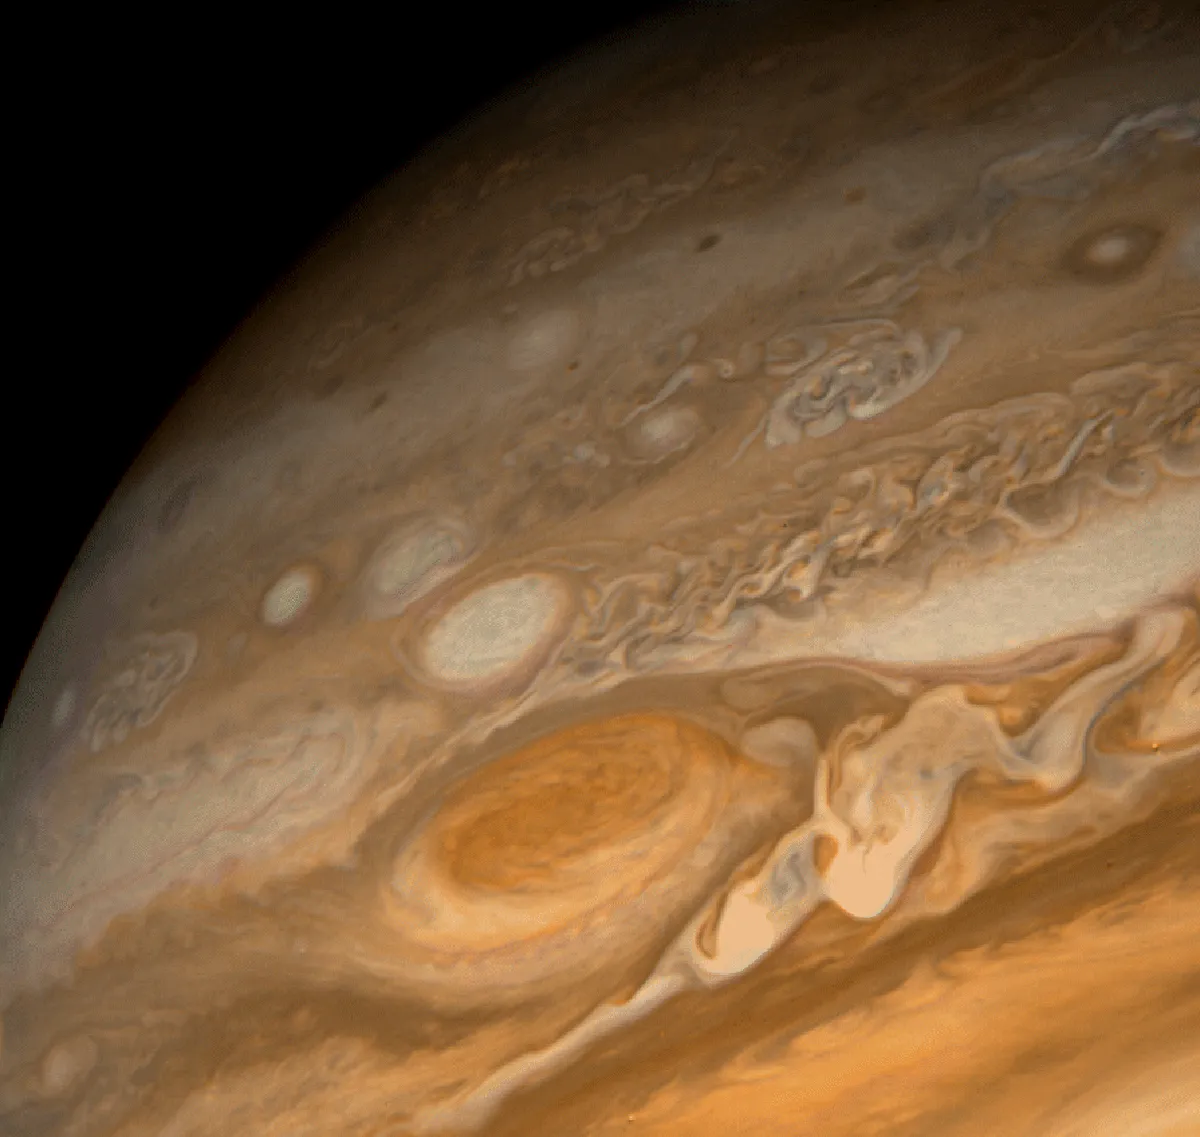 An image of Jupiter and its Great Red Spot, captured during the Voyager mission. Credit: NASA/JPL-Caltech